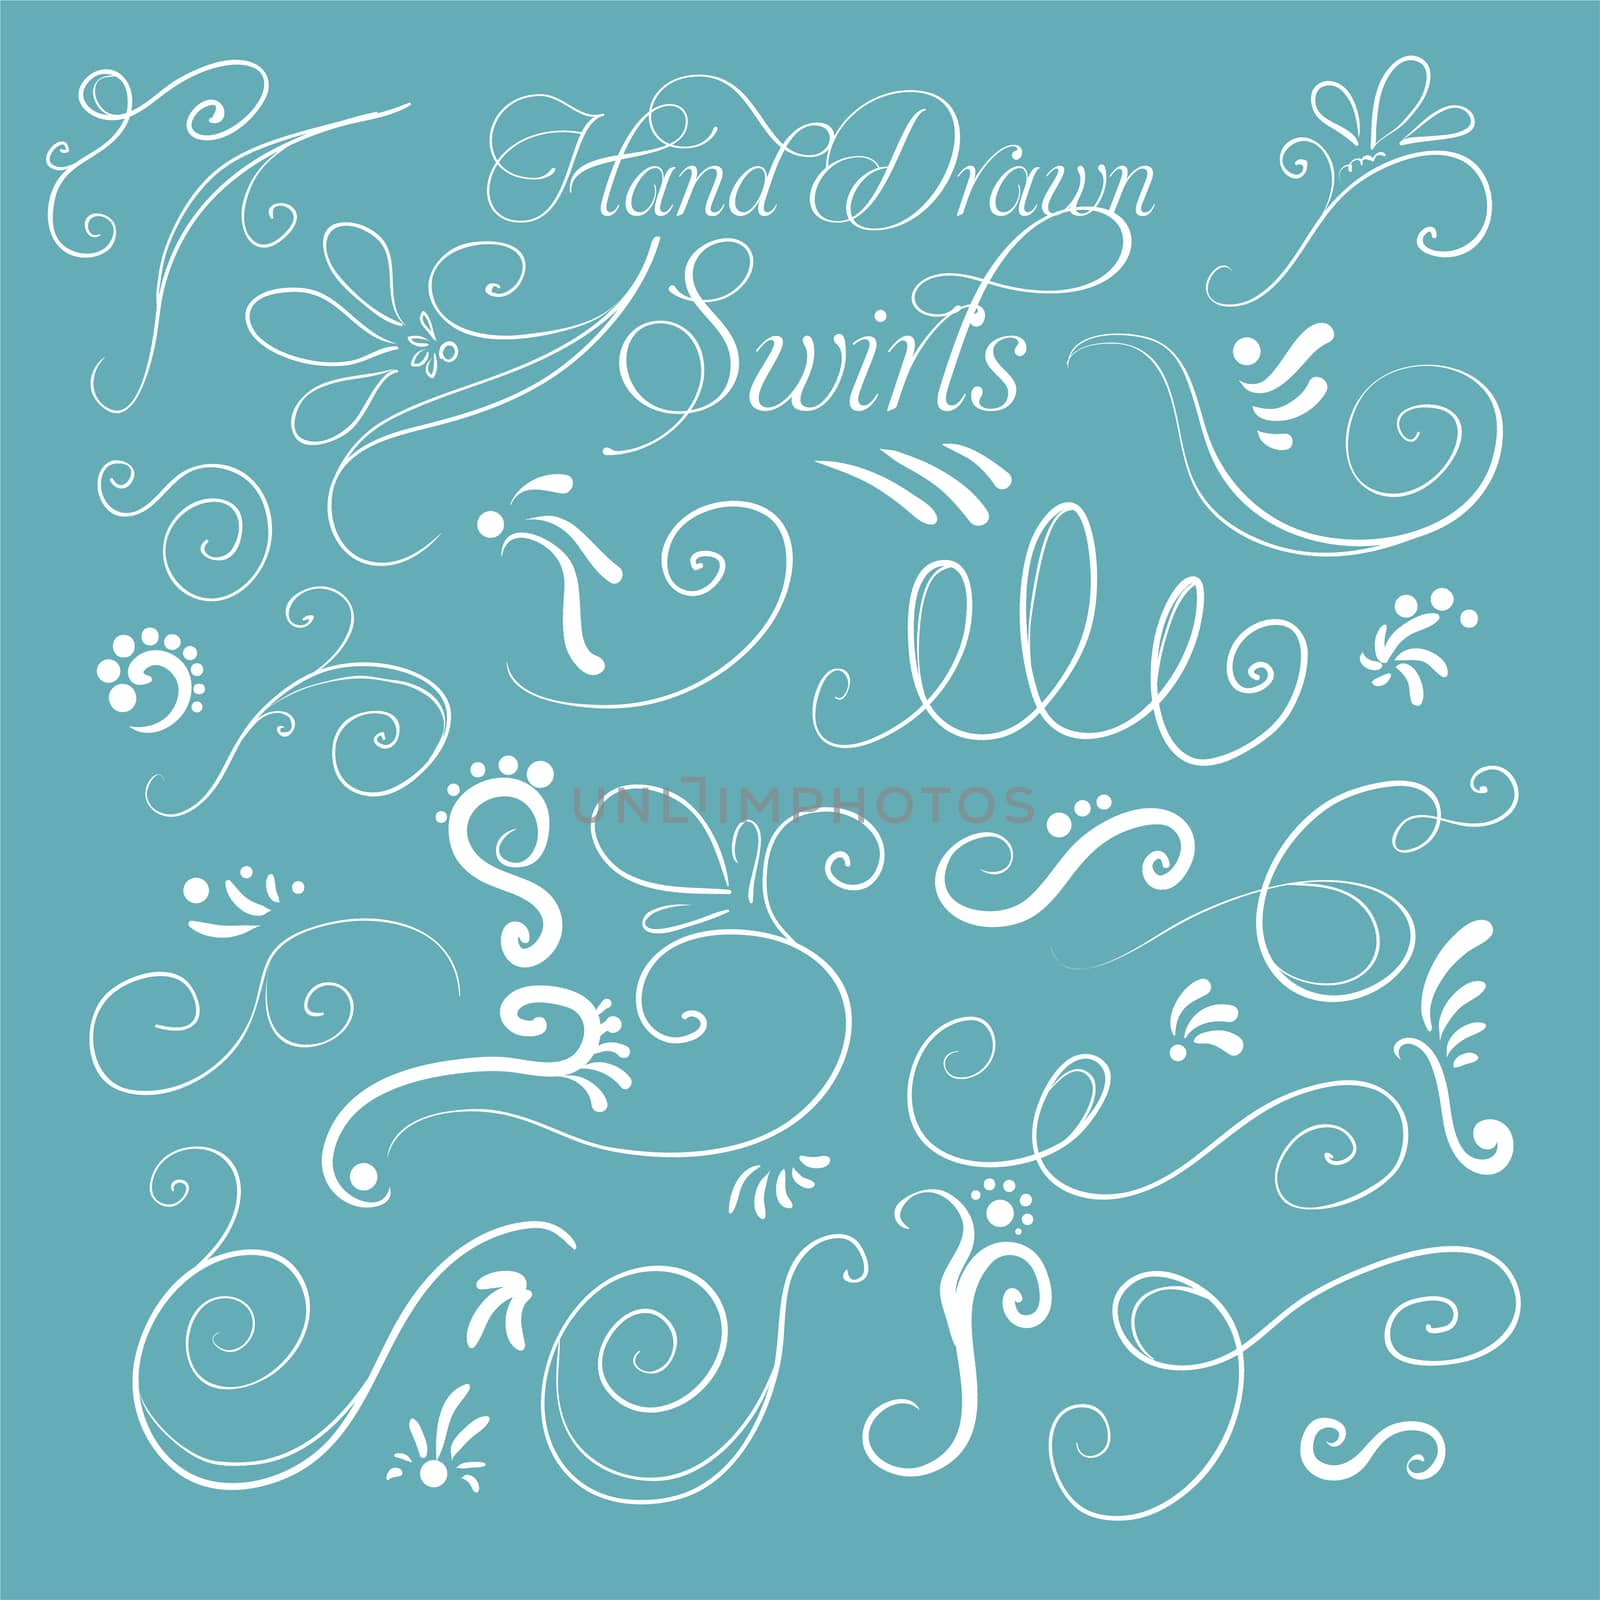 Set of decorative swirls hand-drawn on a turquoise background for your design. by Adamchuk